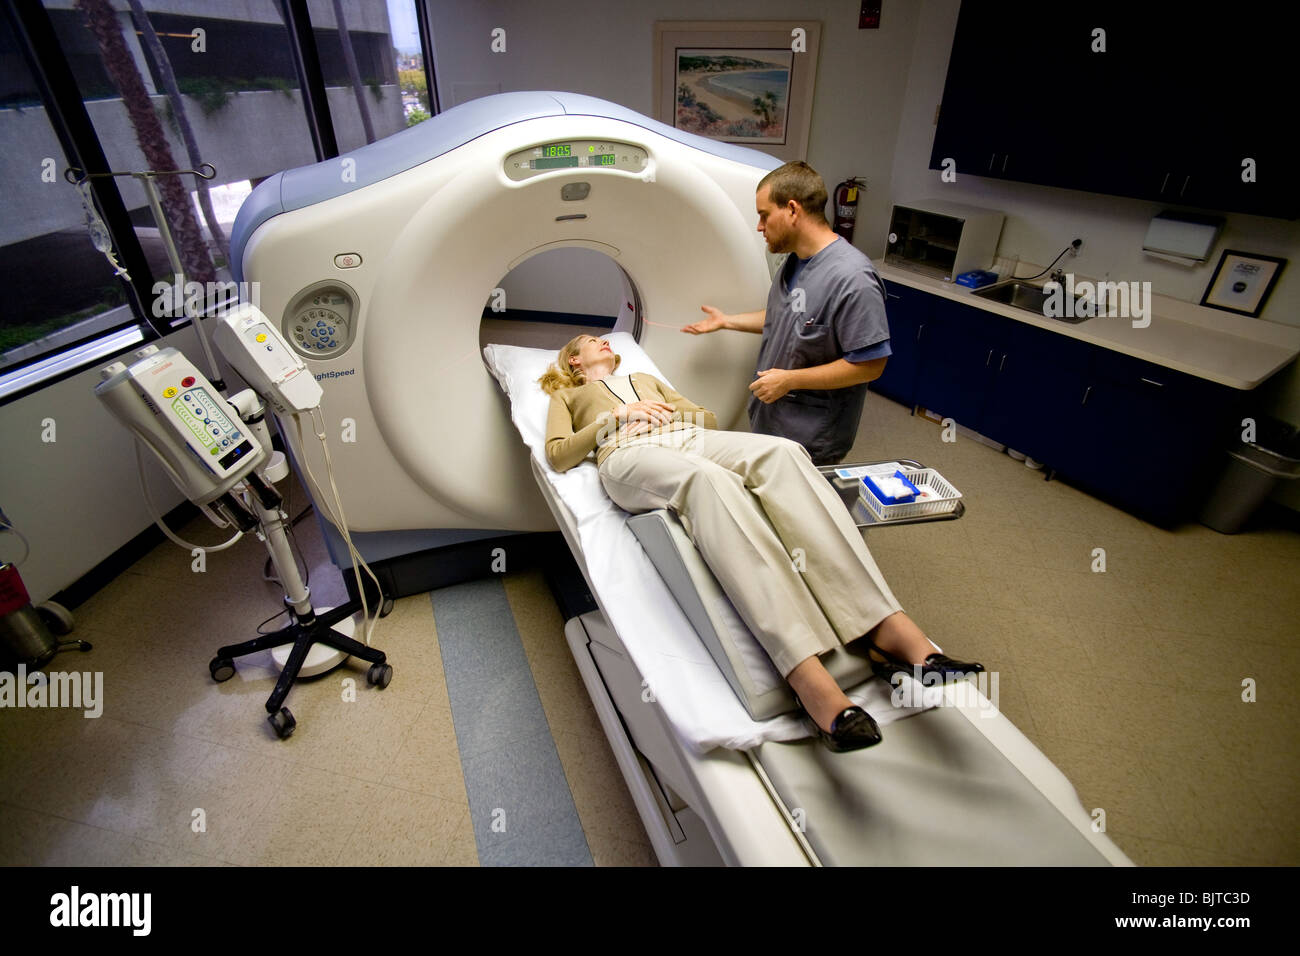 A medical technician prepares a patient for a CT examination at a California radiology clinic using a multi-slice CT scanner. Stock Photo